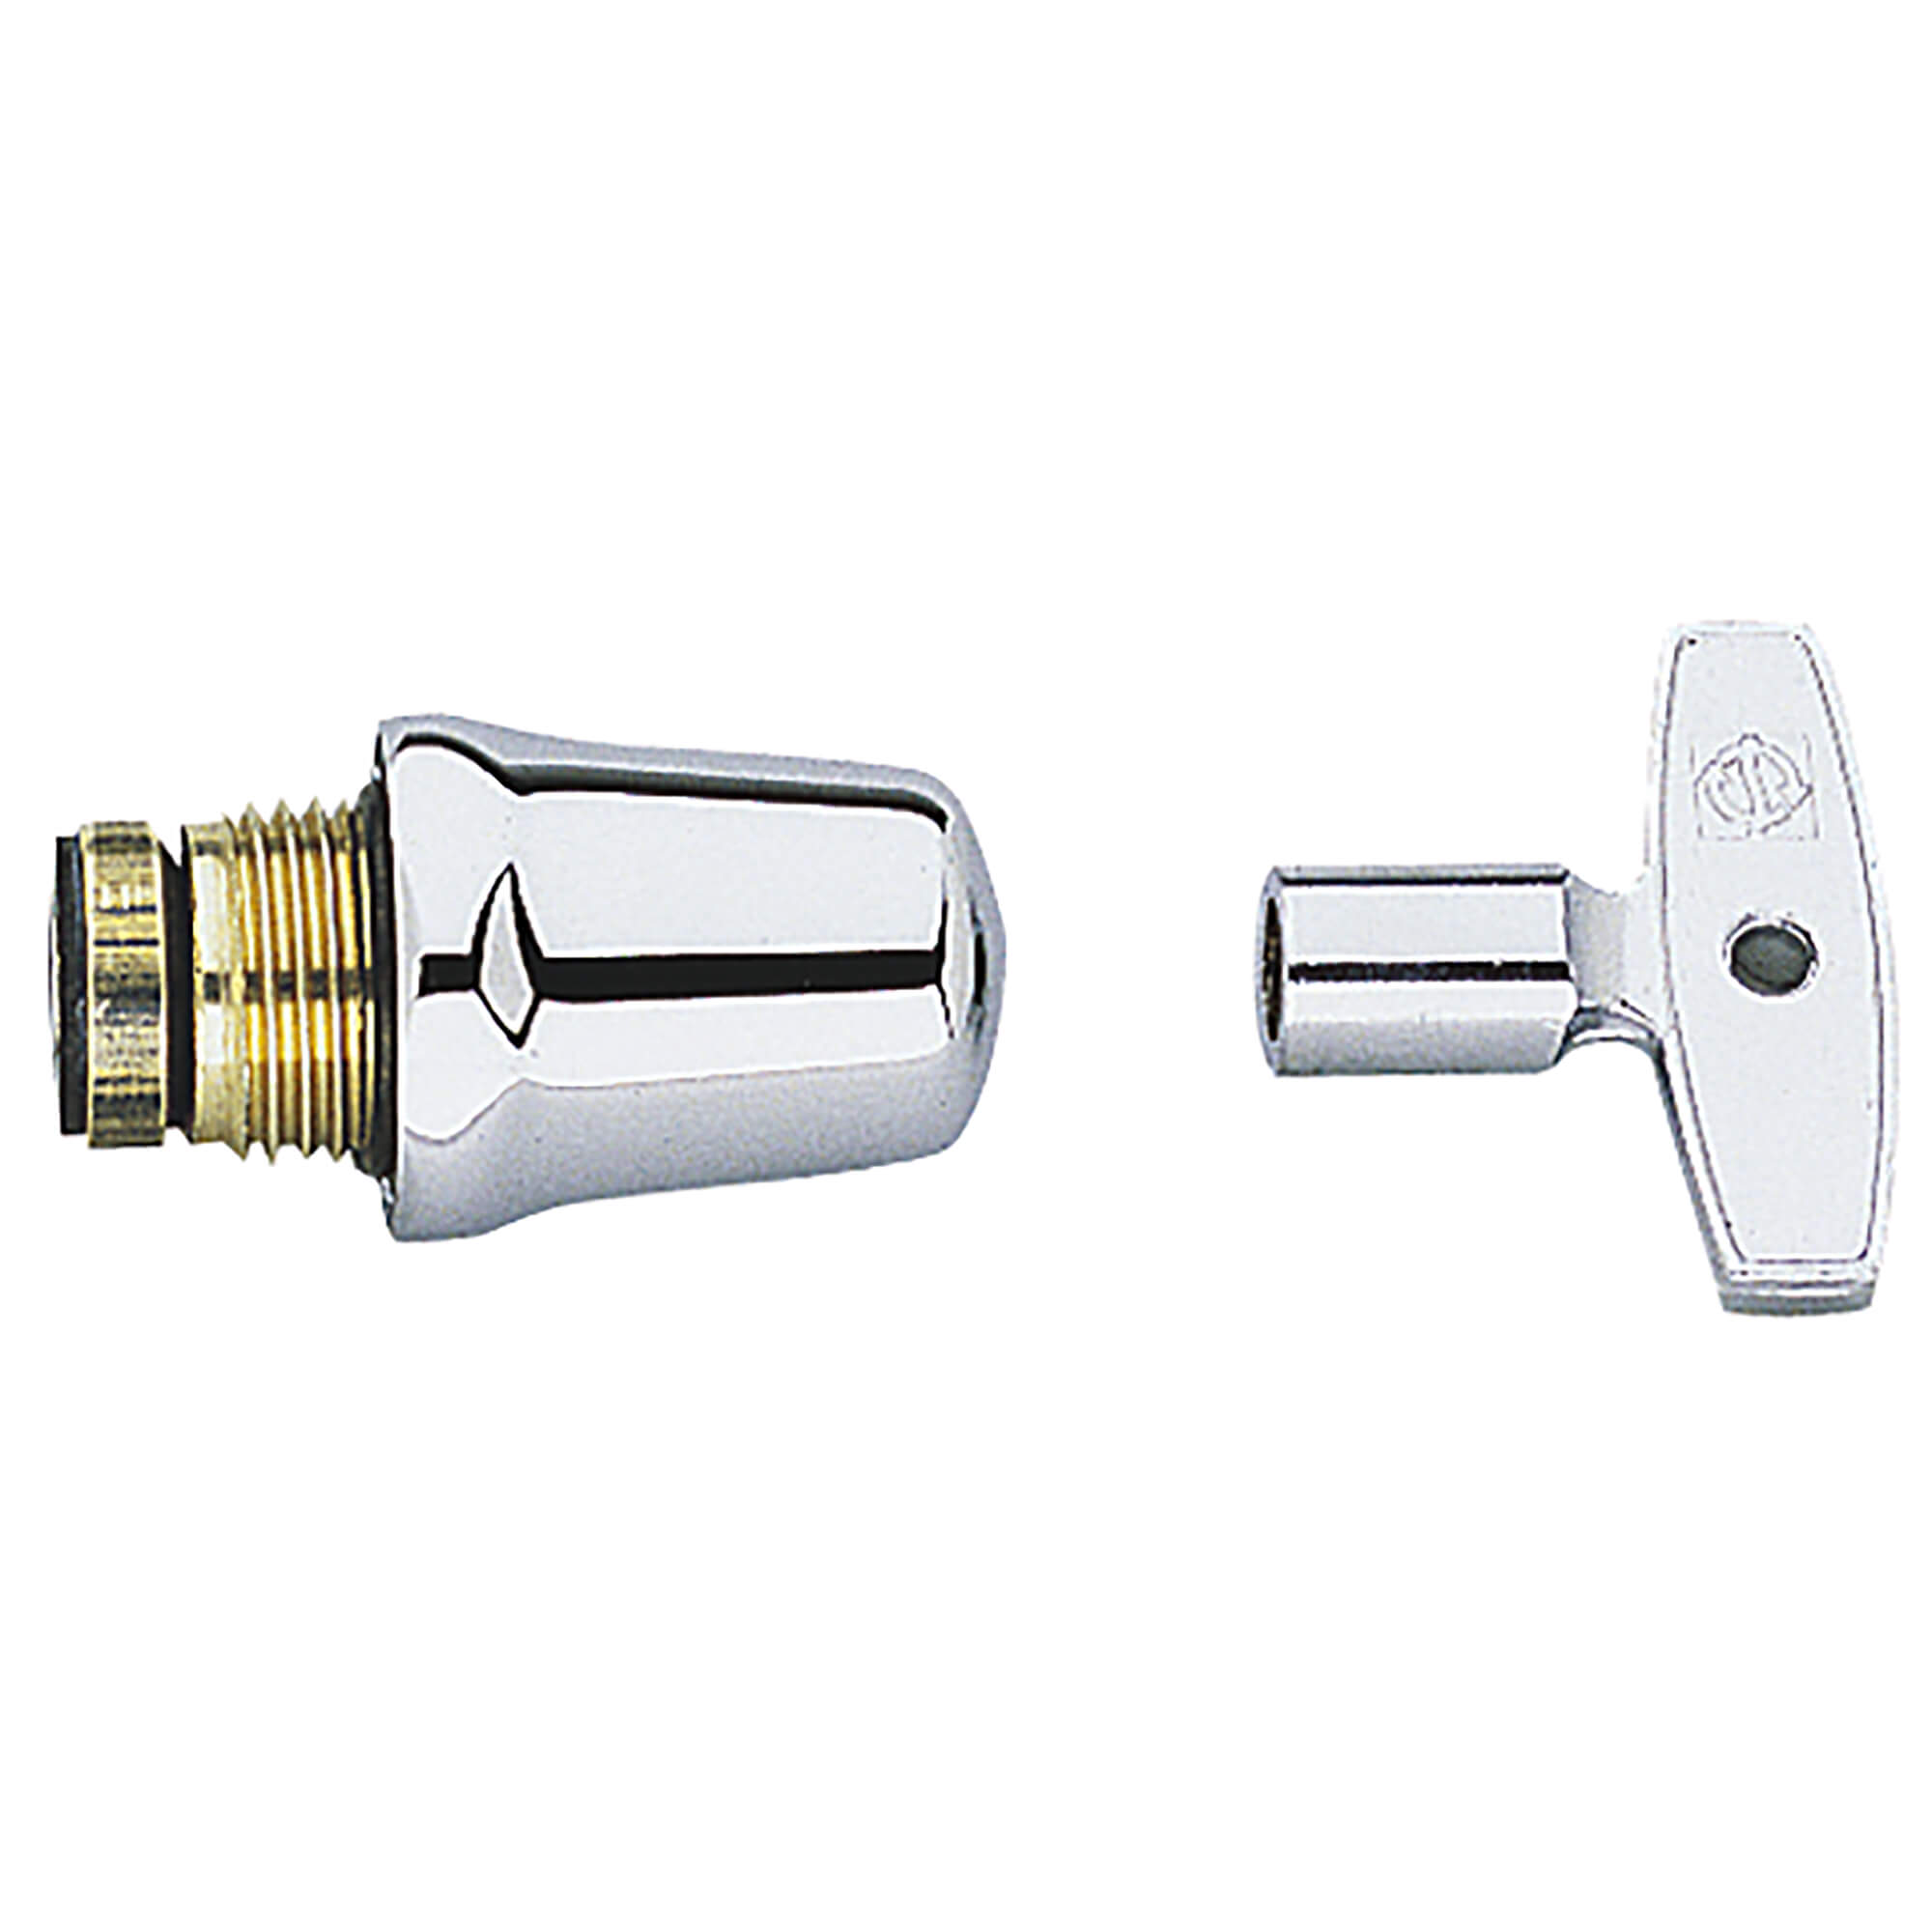 1/2" Cartridge With Lever Handle